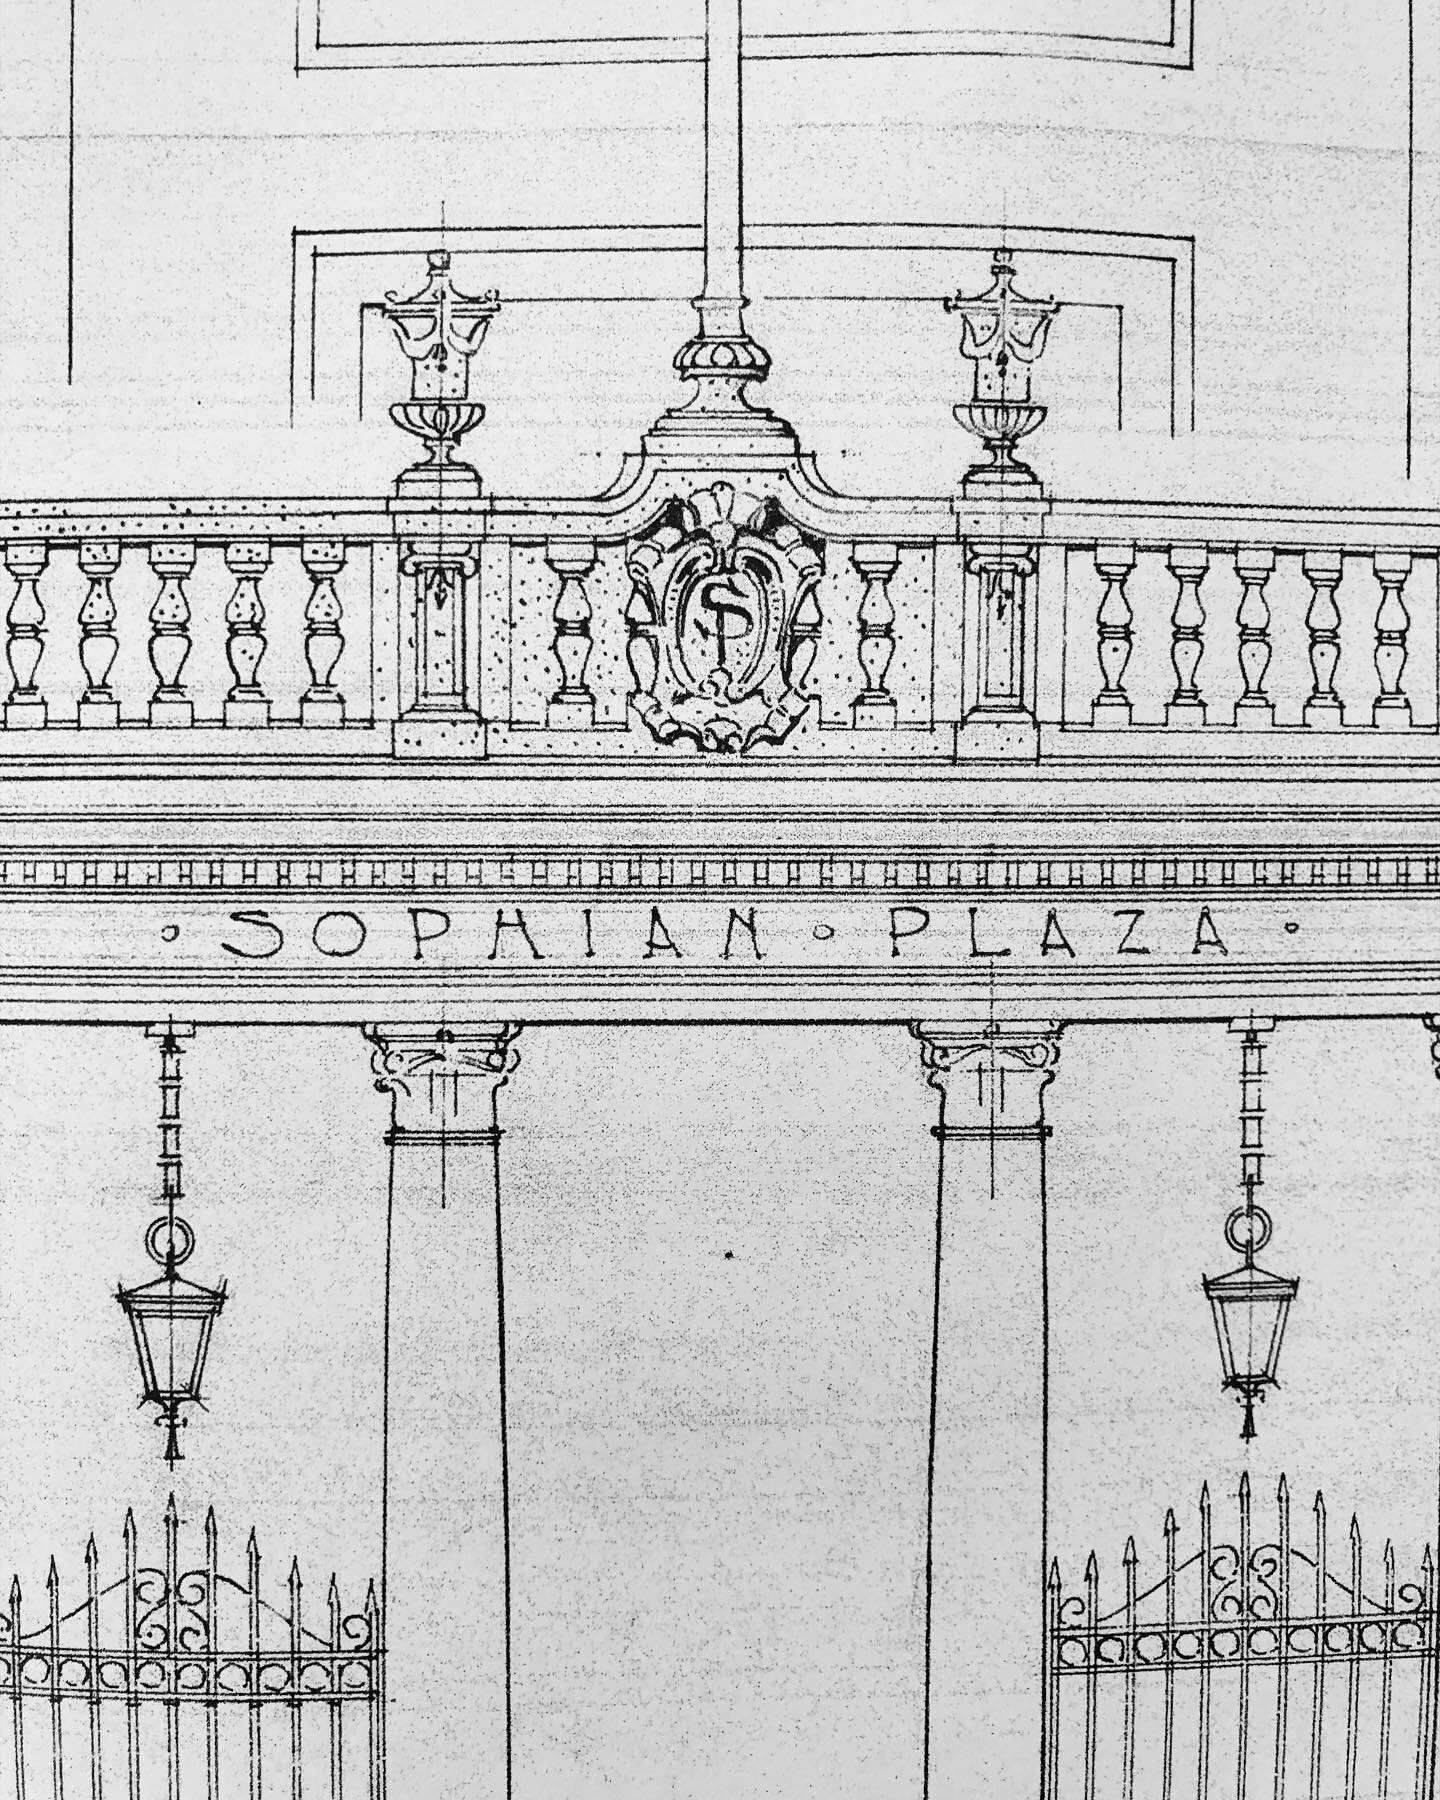 The Sophian completed restoration of our hundred year old entrance colonnade. This is the 1922 architect&rsquo;s rendering. 

#kansascity #sophianplazakc #sophianplaza #historicarchitecture